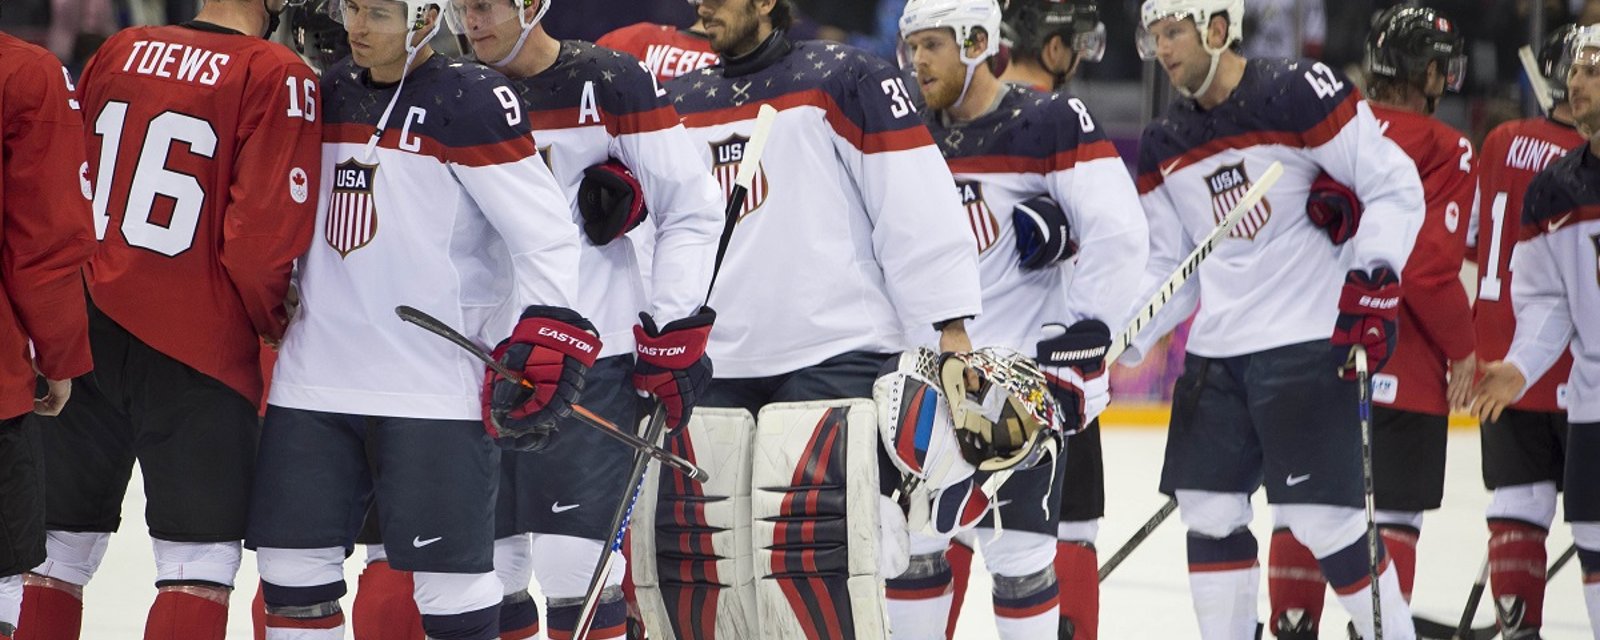 Team USA is out to destroy Canada at the World Cup.